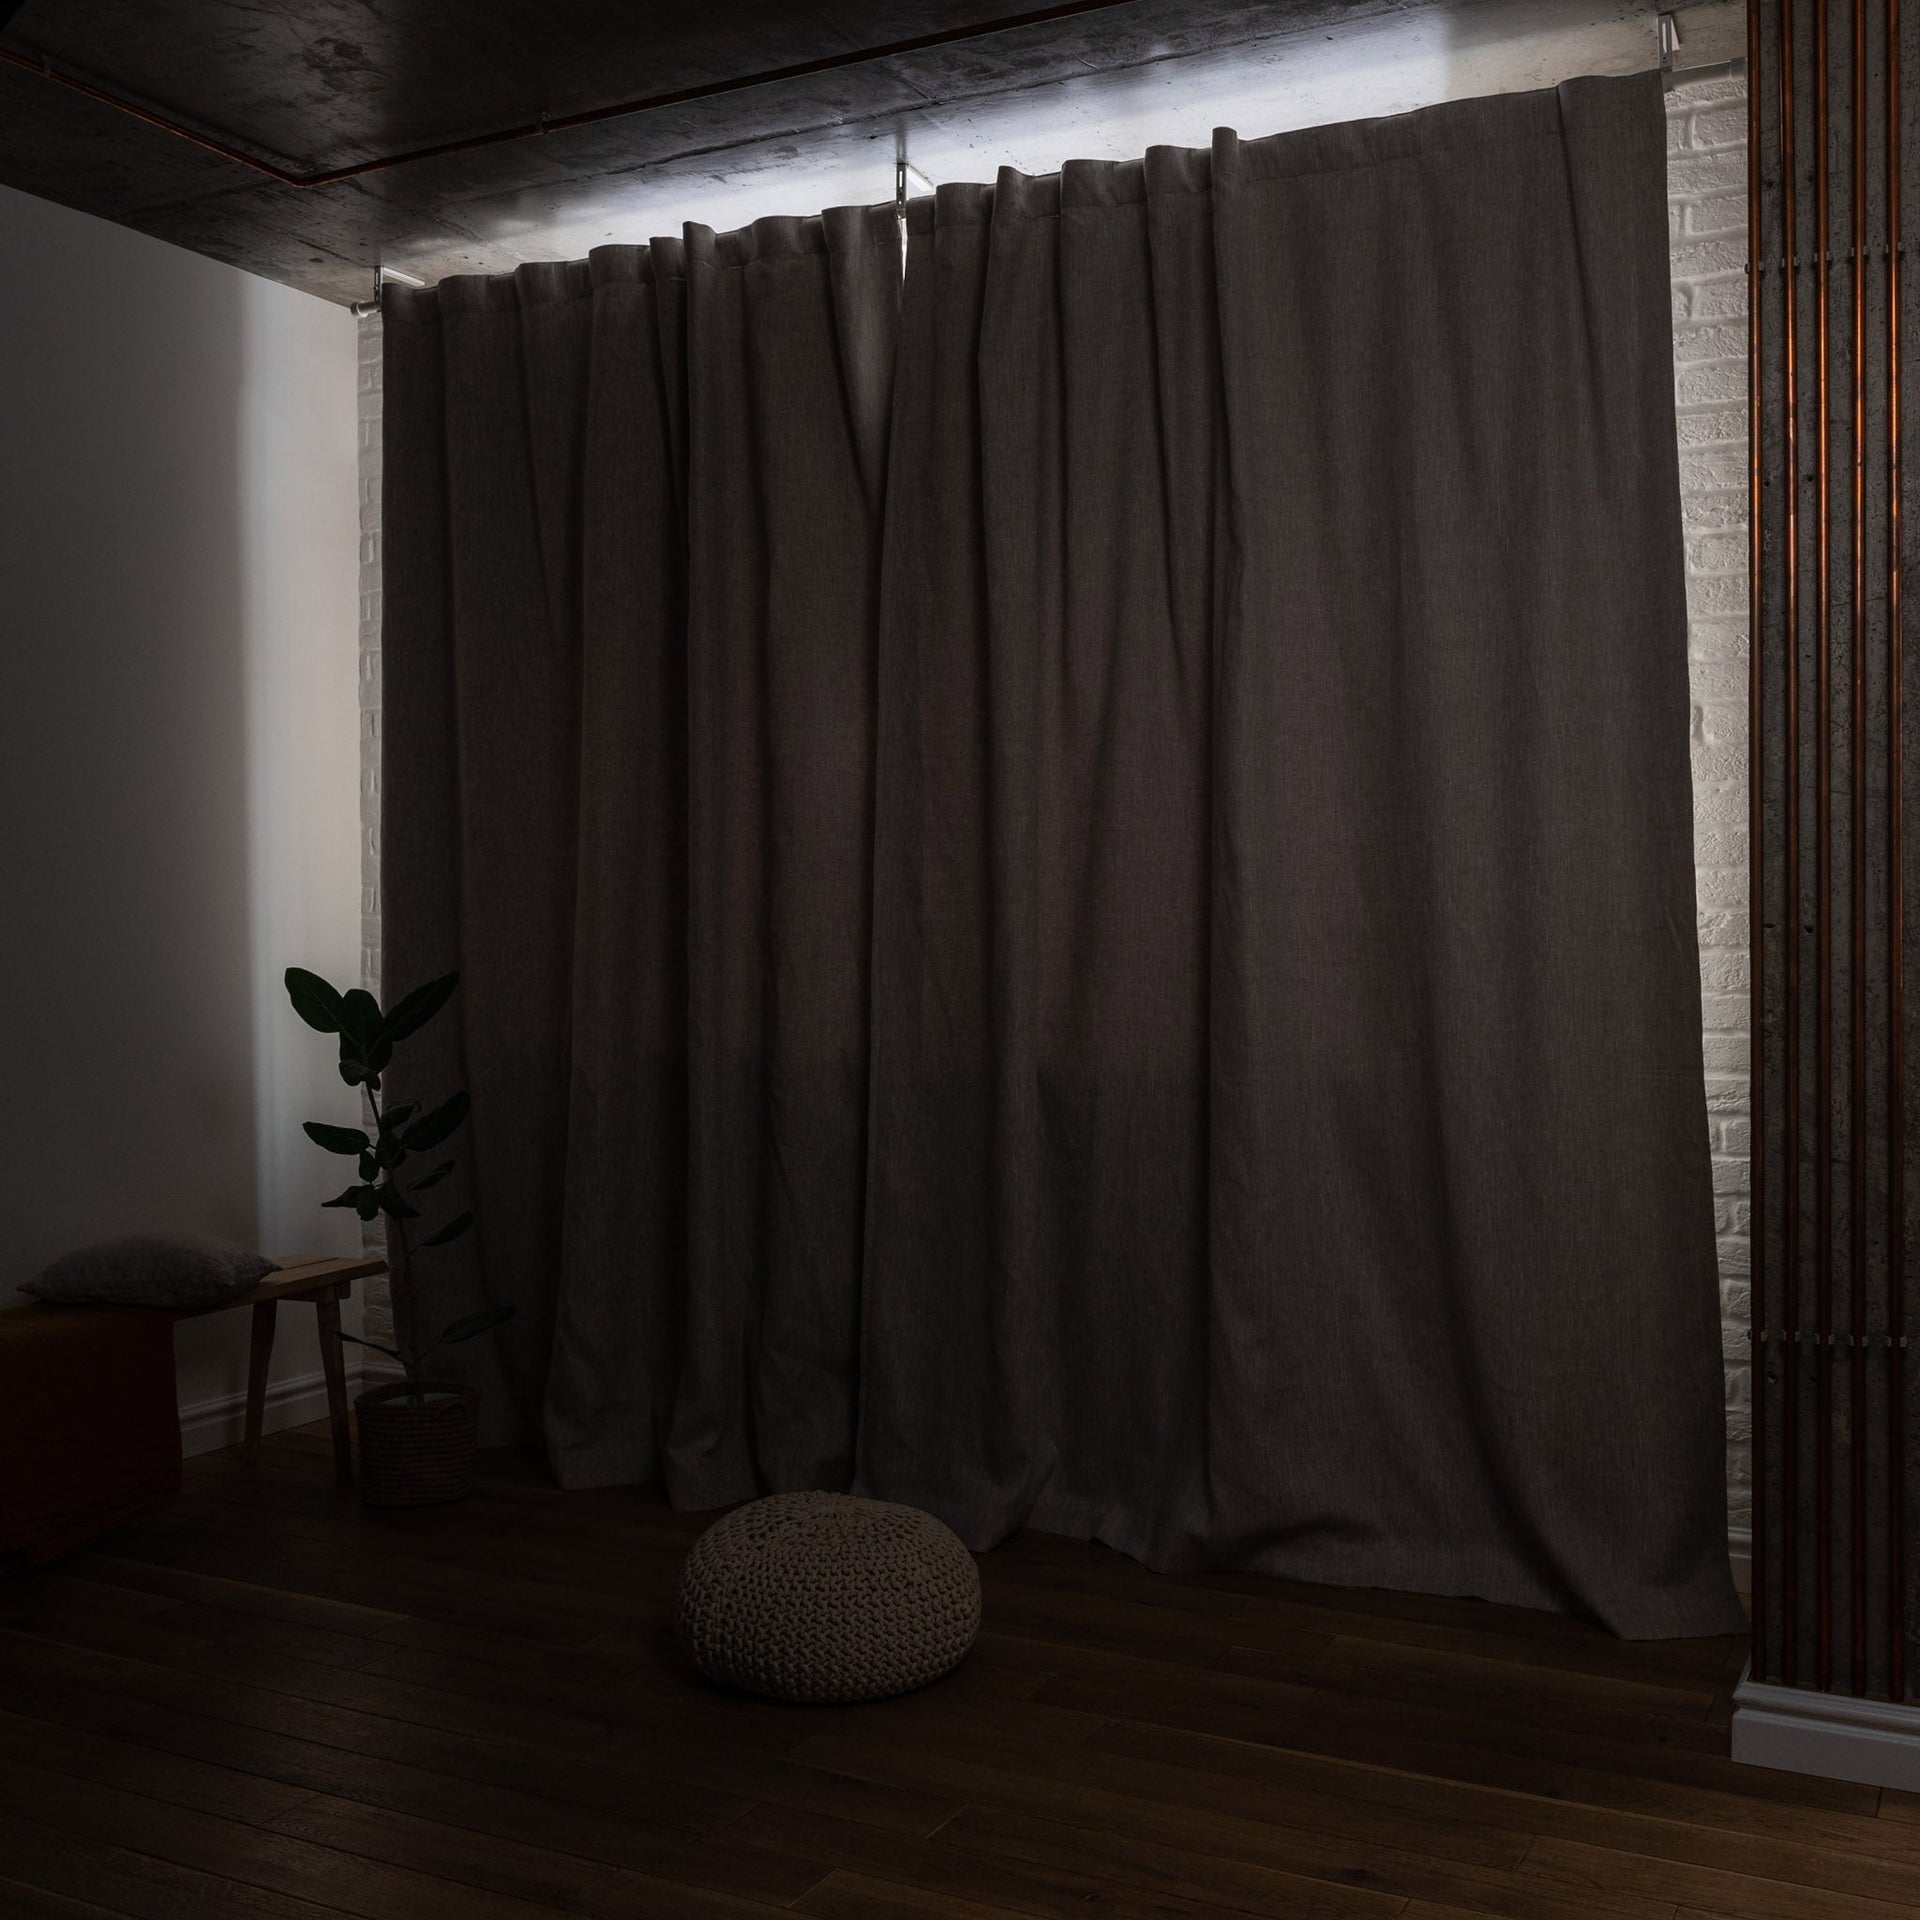  Curtain with Blackout Lining in Natural Color